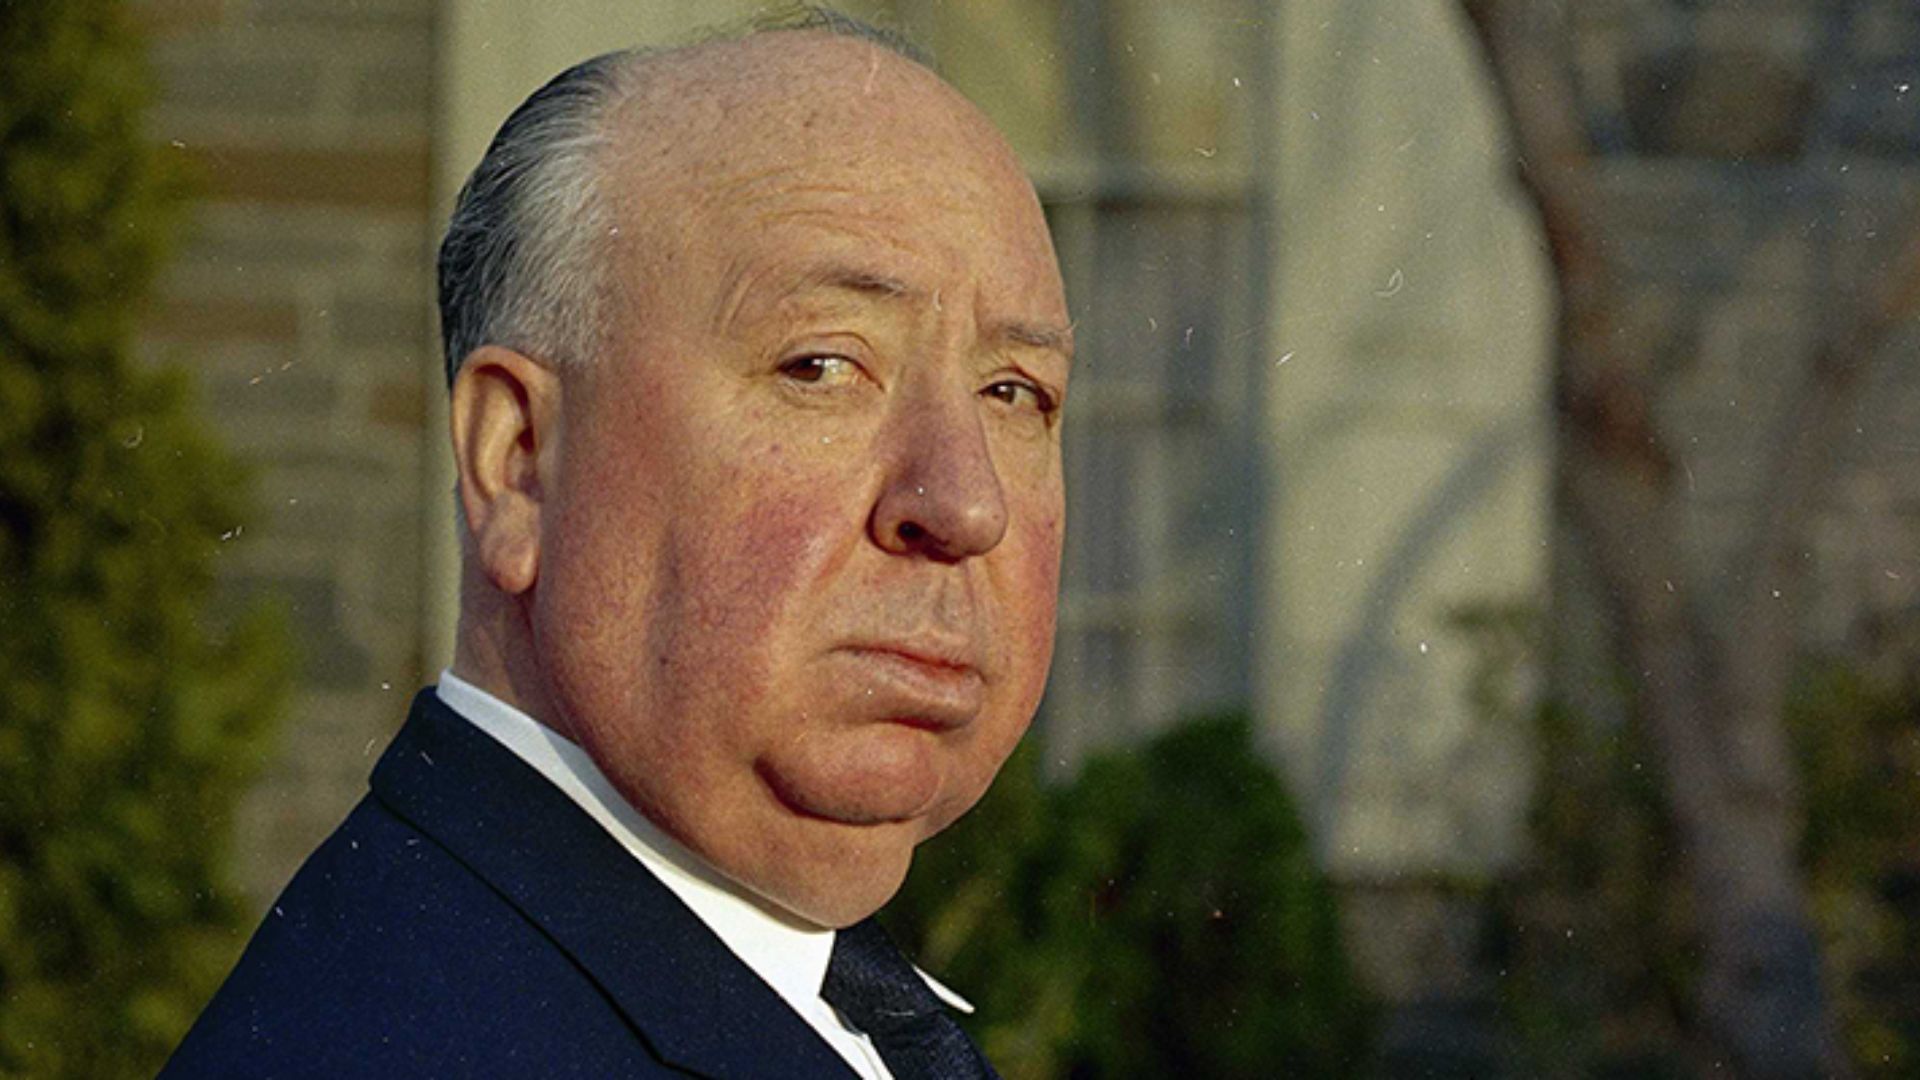 Alfred Hitchcock Wearing A Blue Suit